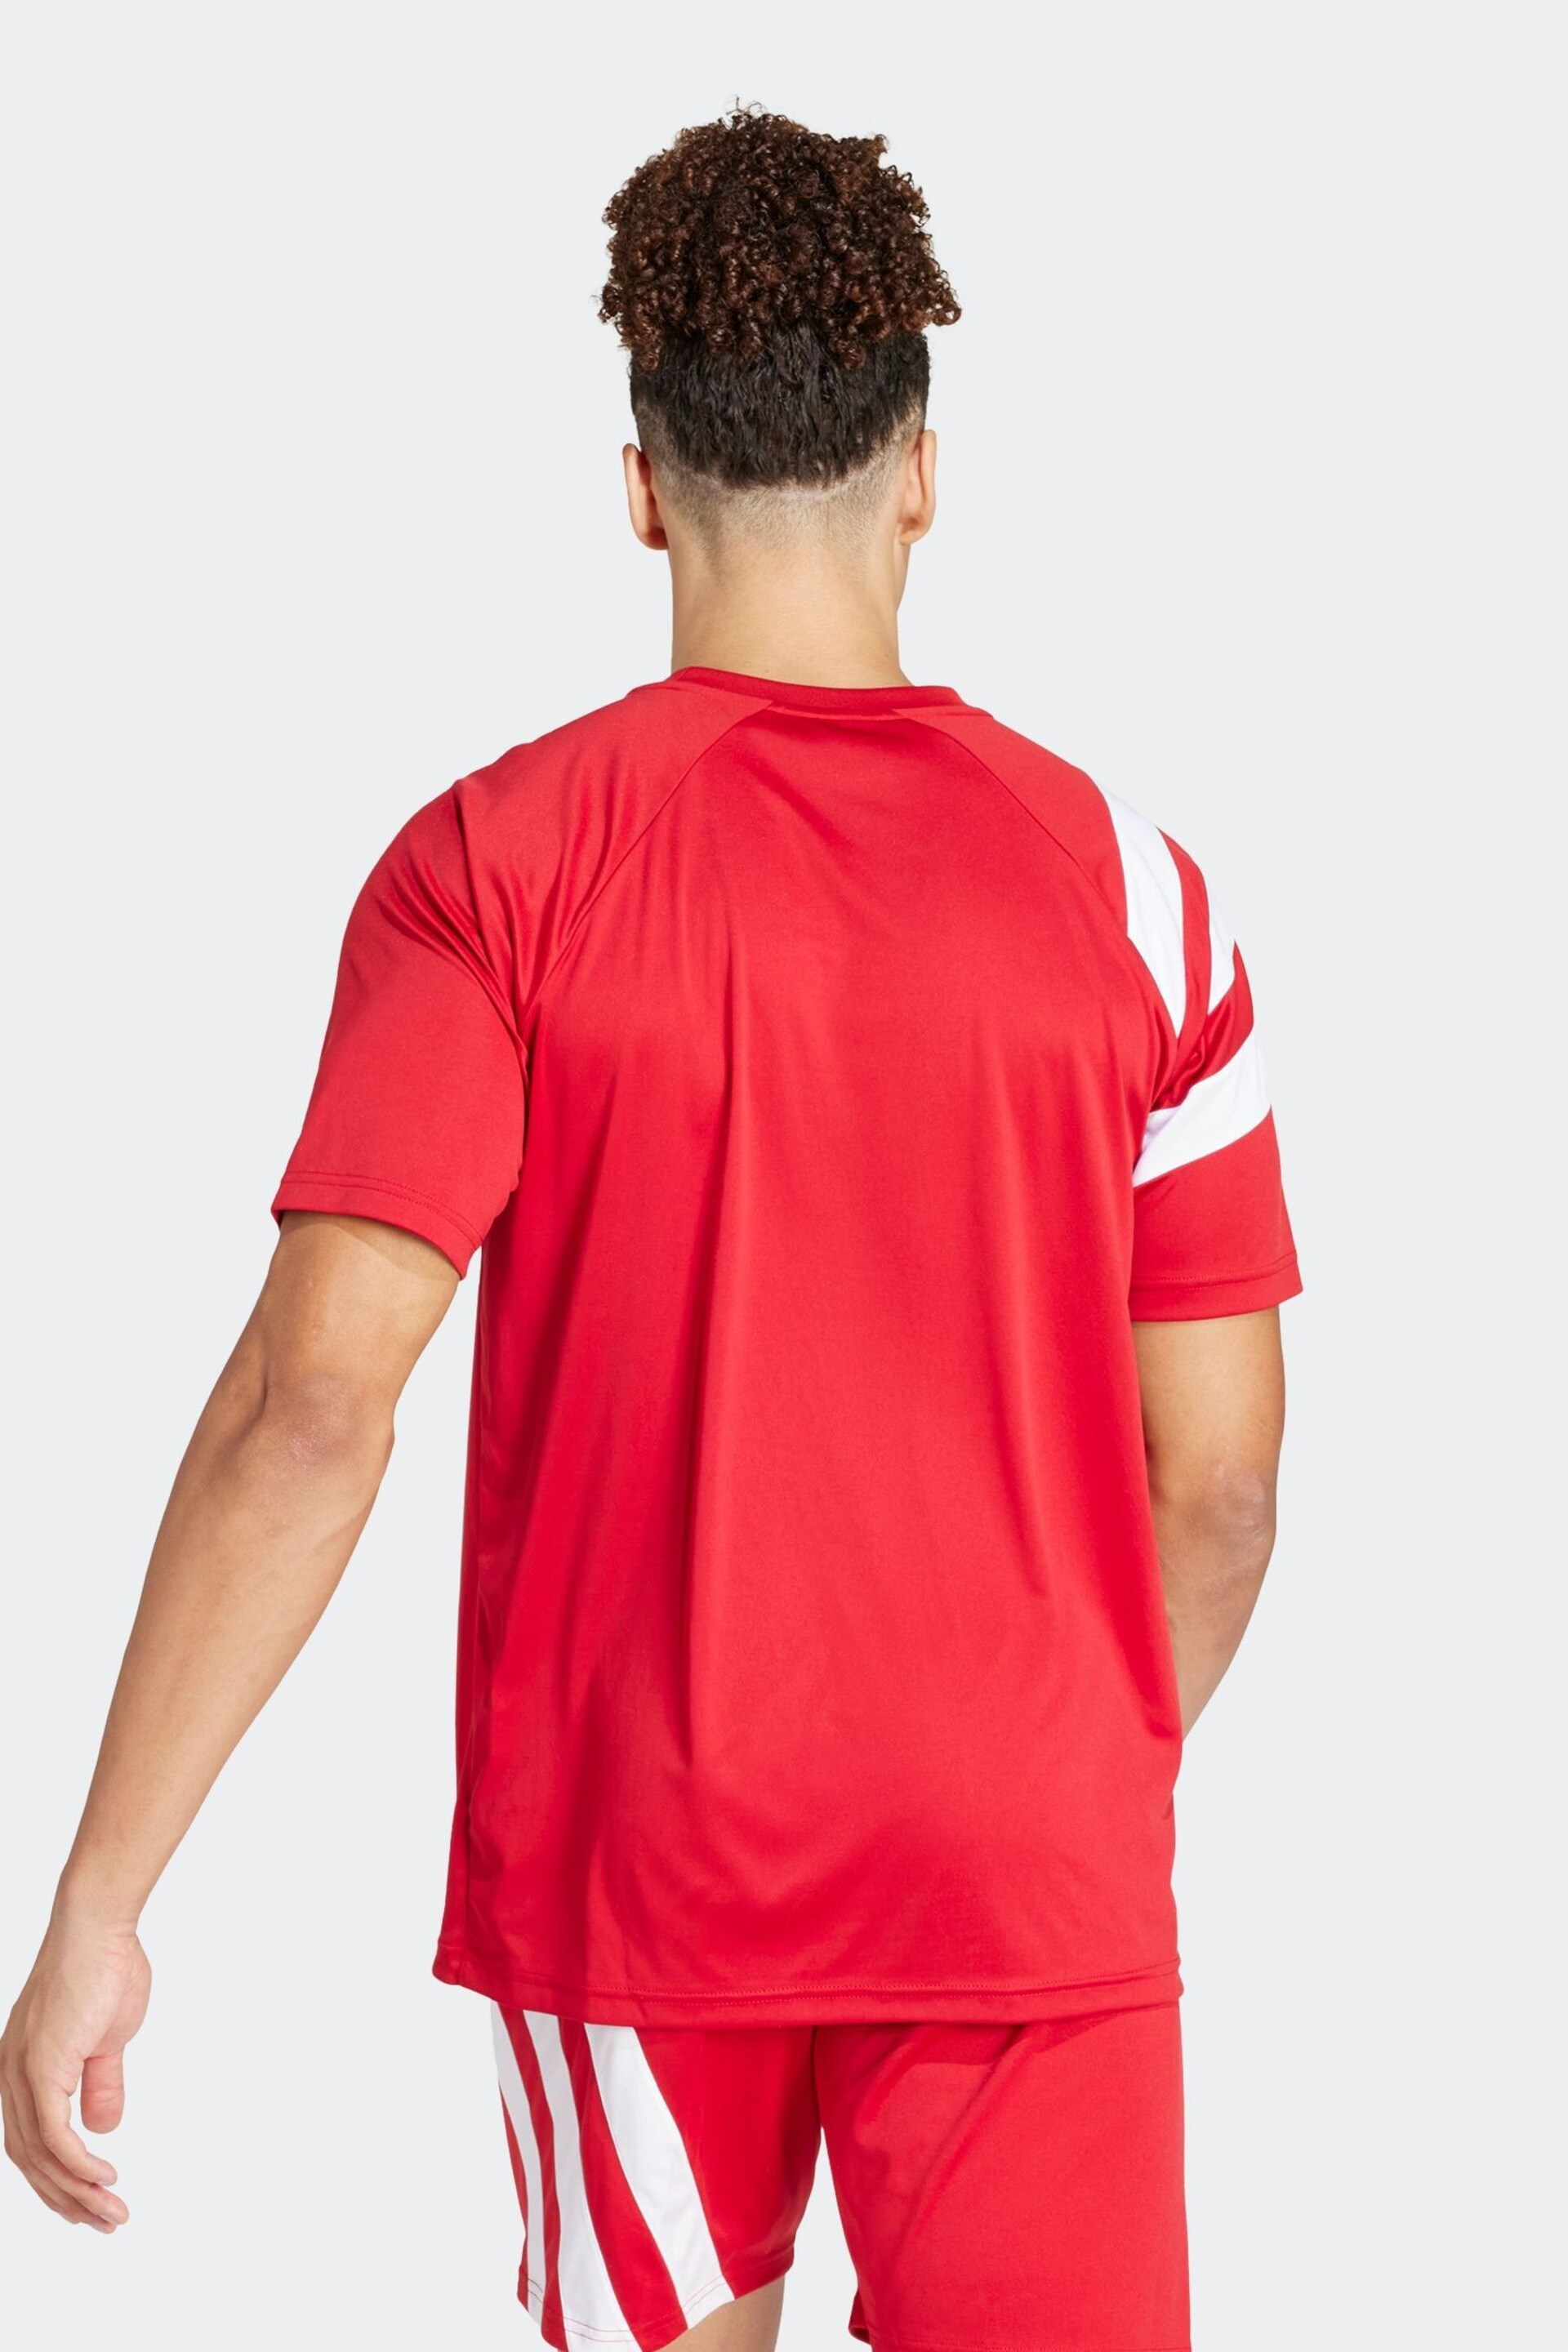 adidas Red Fortore 23 Jersey - Image 3 of 7